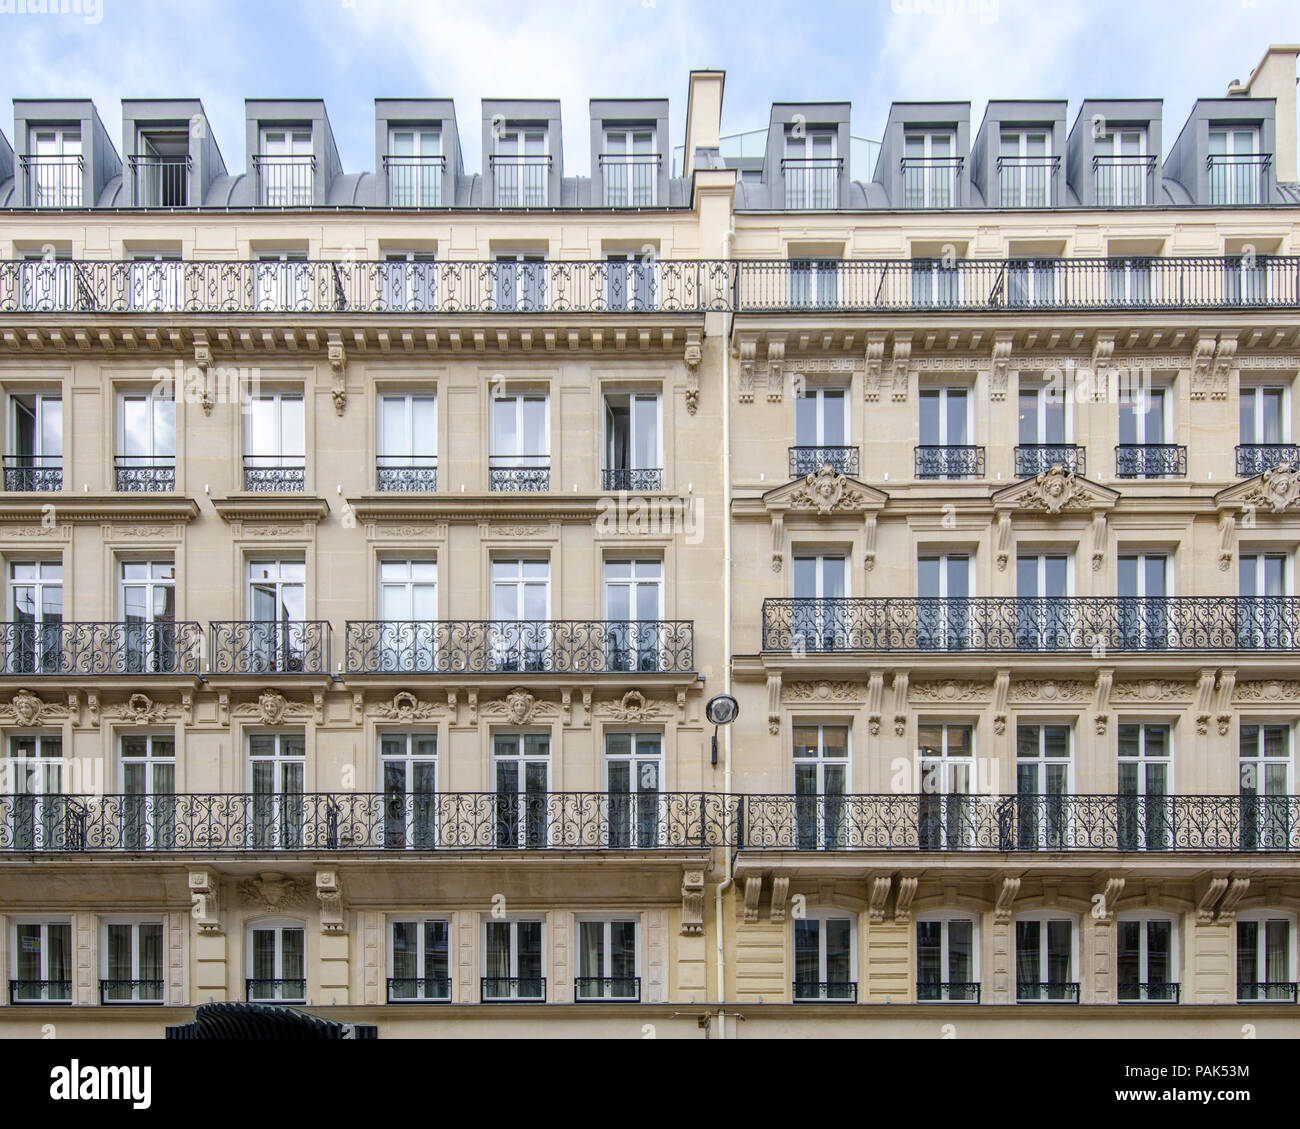 Typical Parisian building elevations in this wonderful European city with large windows and classic details made of stone and iron on a straight persp Stock Photo